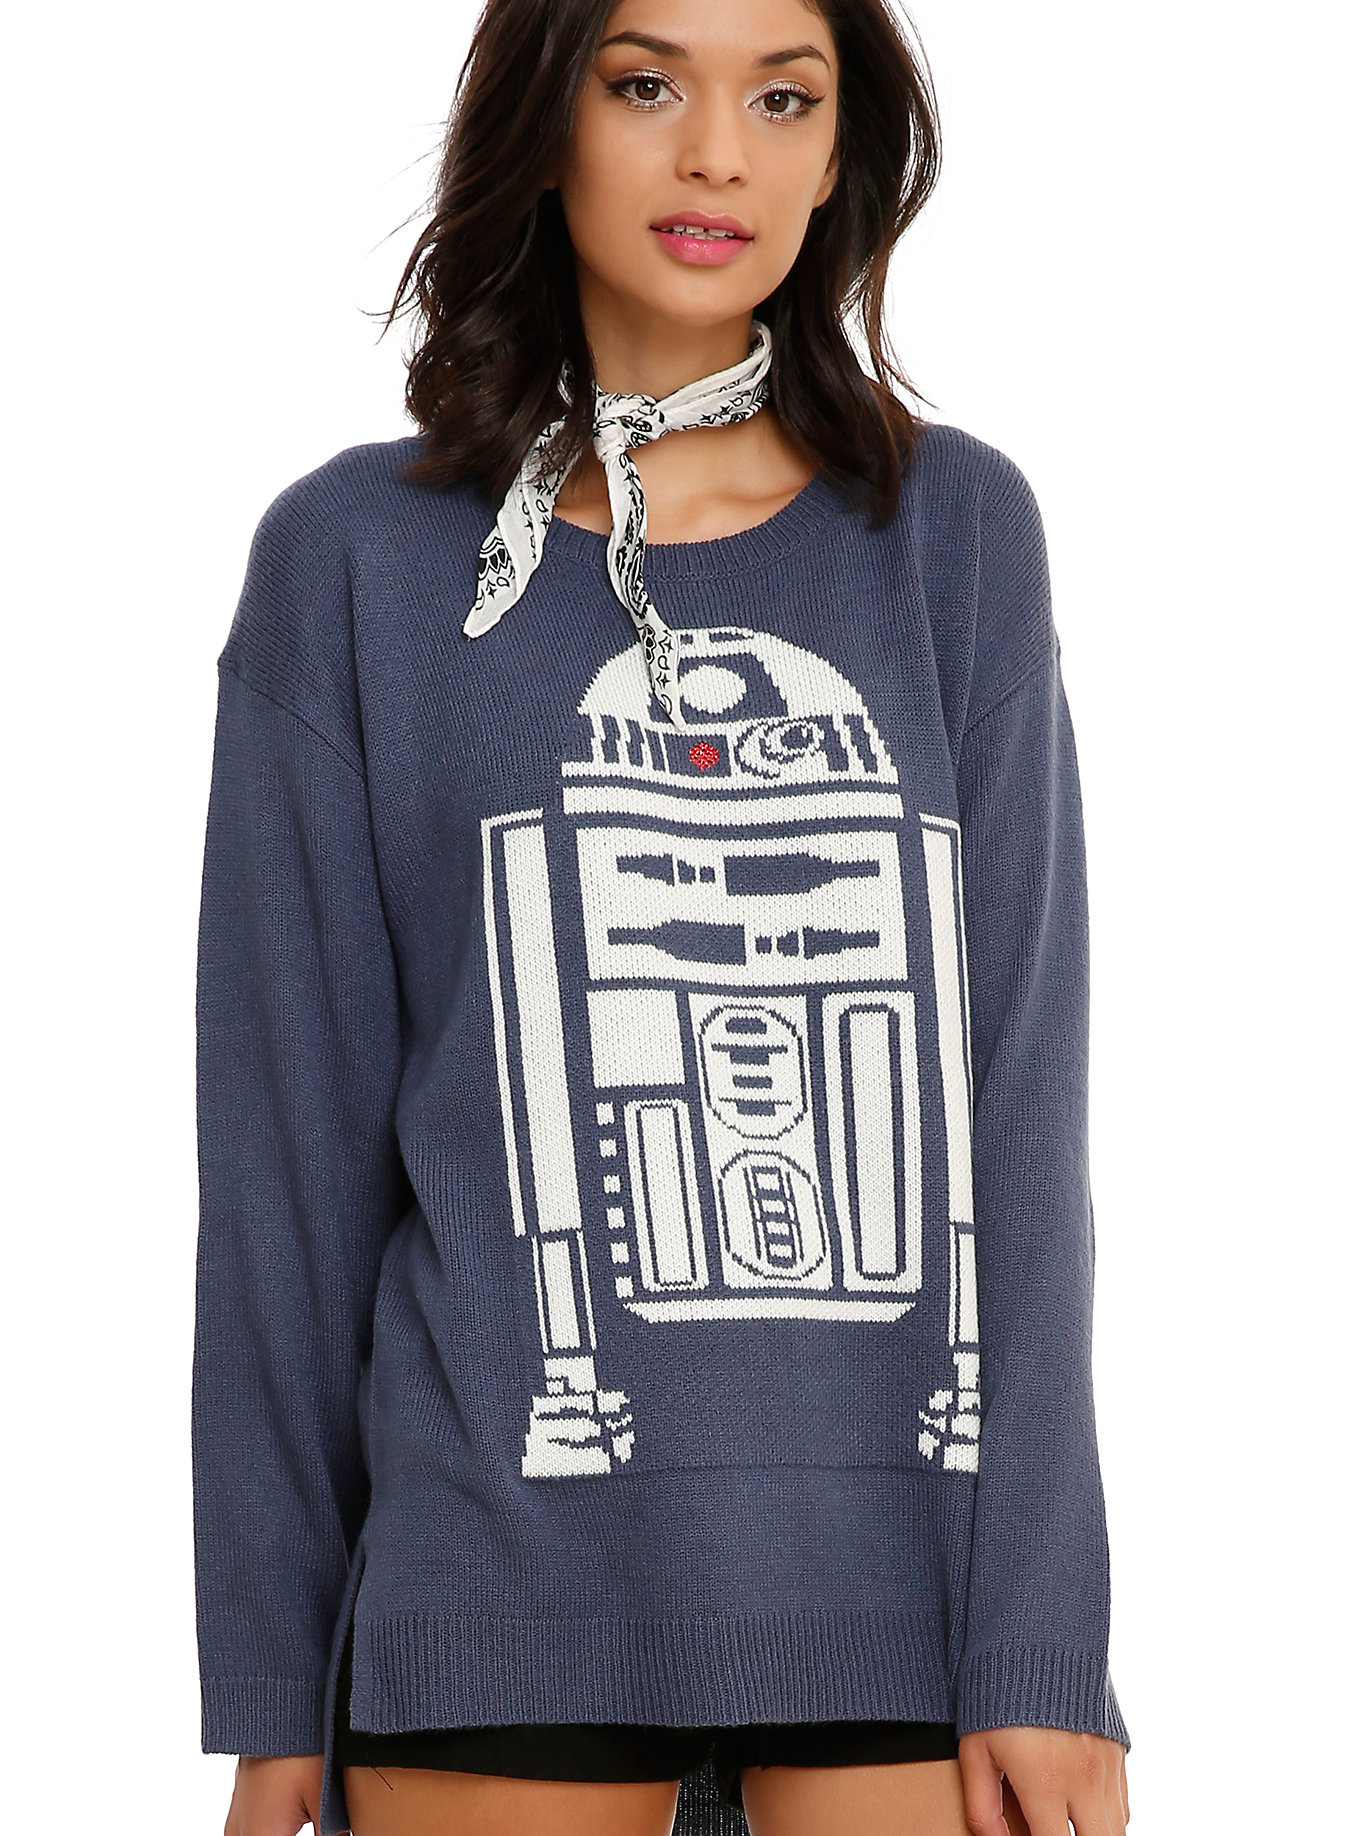 hottopic_r2d2knittedsweater